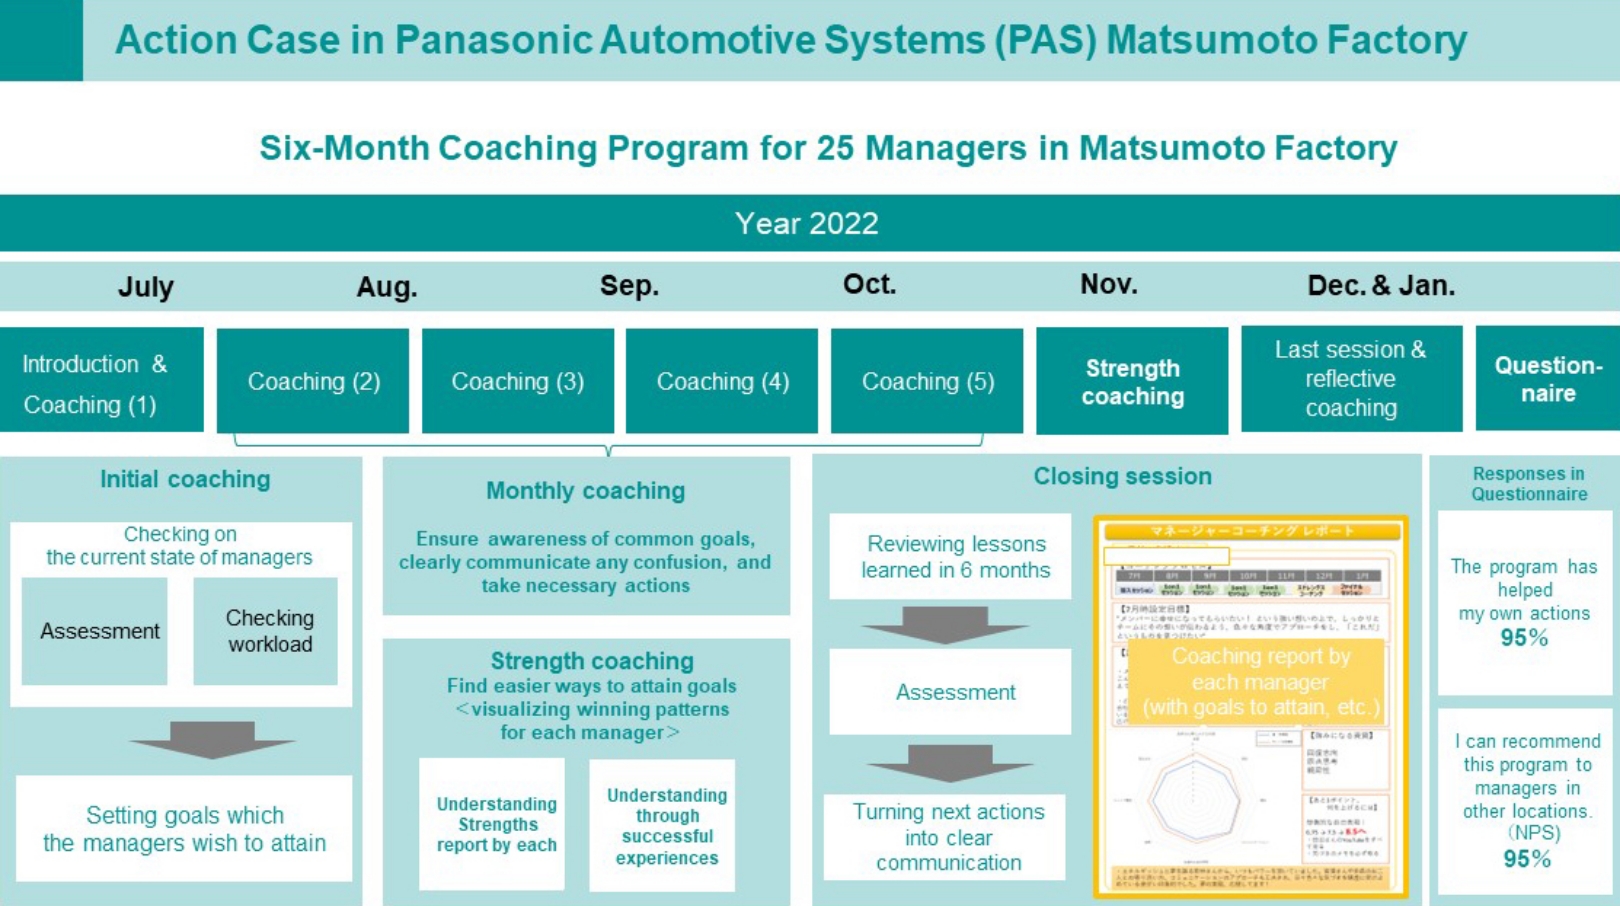 Image: Summary of Coaching Program including schedule, details of the program, and results of the questionnaire